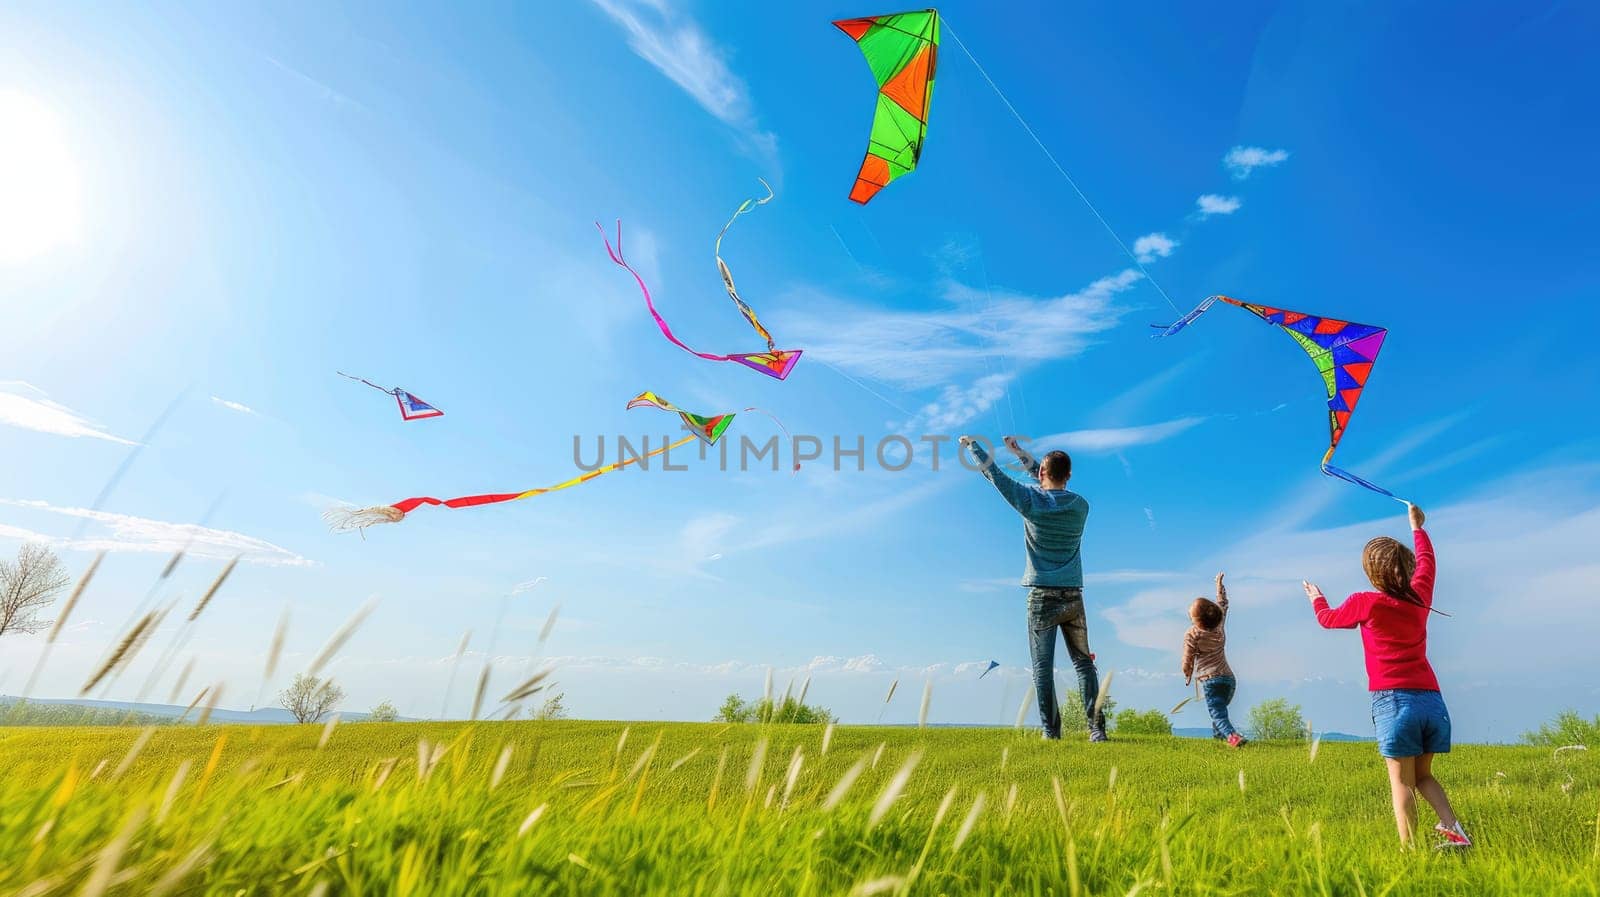 Happy people in nature flying kites beneath a scenic sky in a grassy landscape. AIG41 by biancoblue